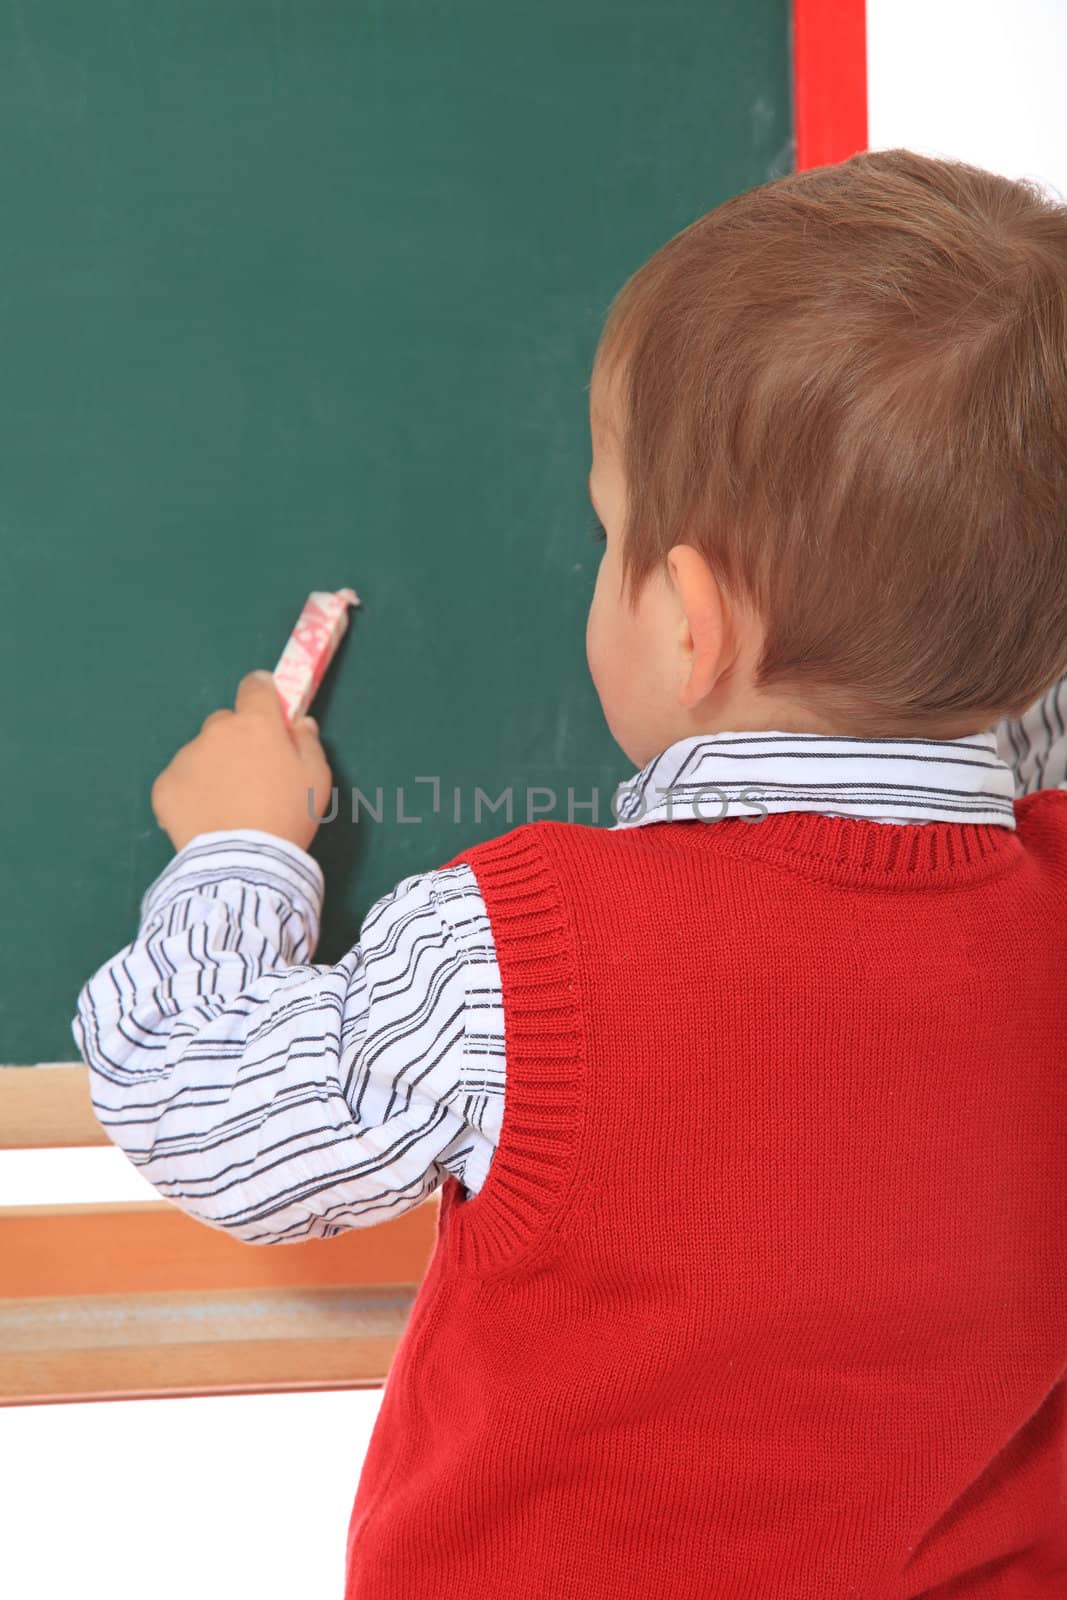 Cute caucasian toddler doodling on chalkboard. All isolated on white background.